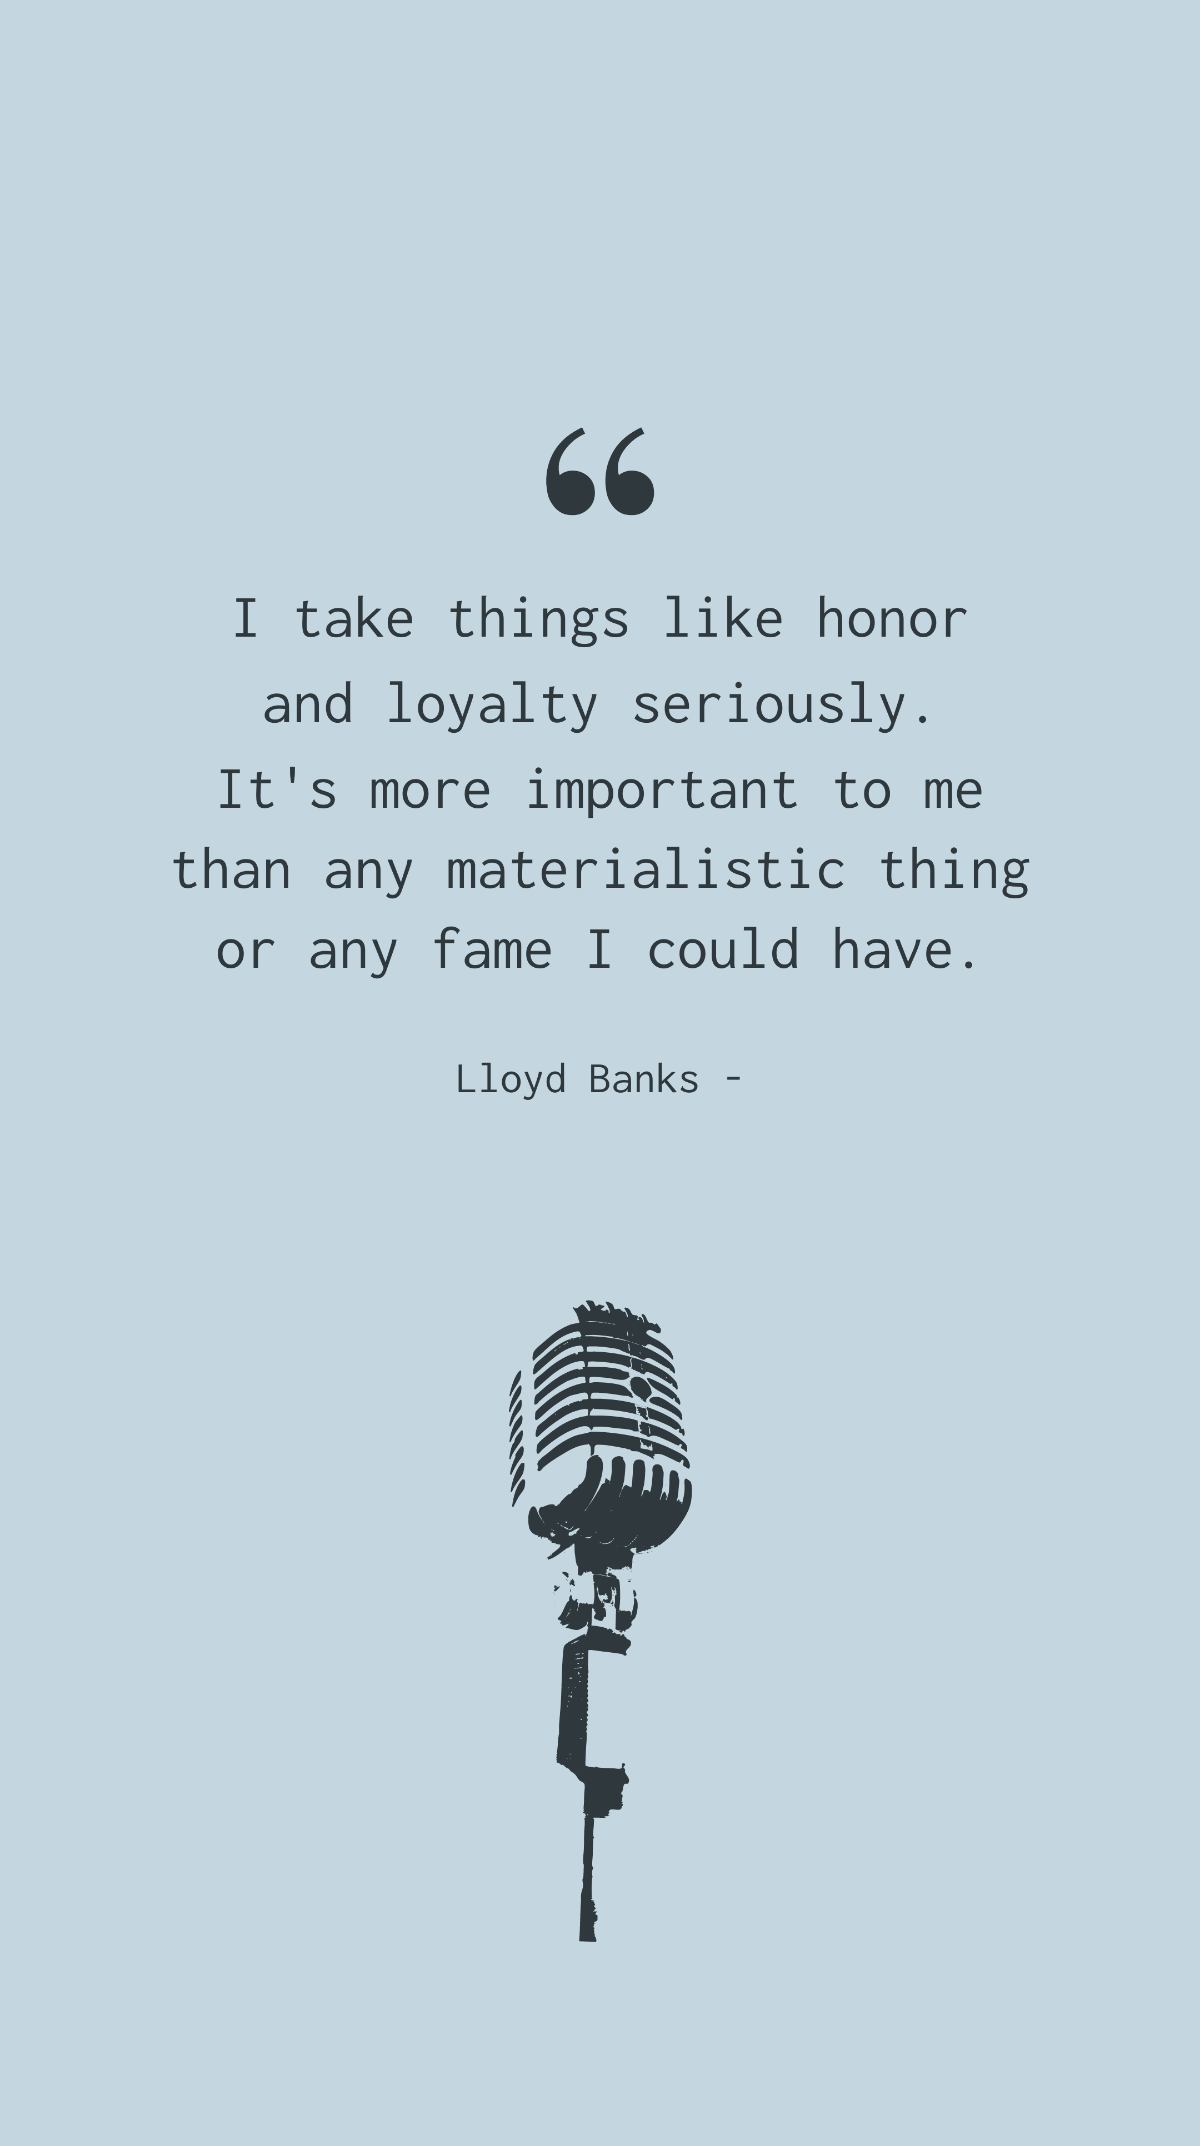 Free Lloyd Banks - I take things like honor and loyalty seriously. It's more important to me than any materialistic thing or any fame I could have. Template